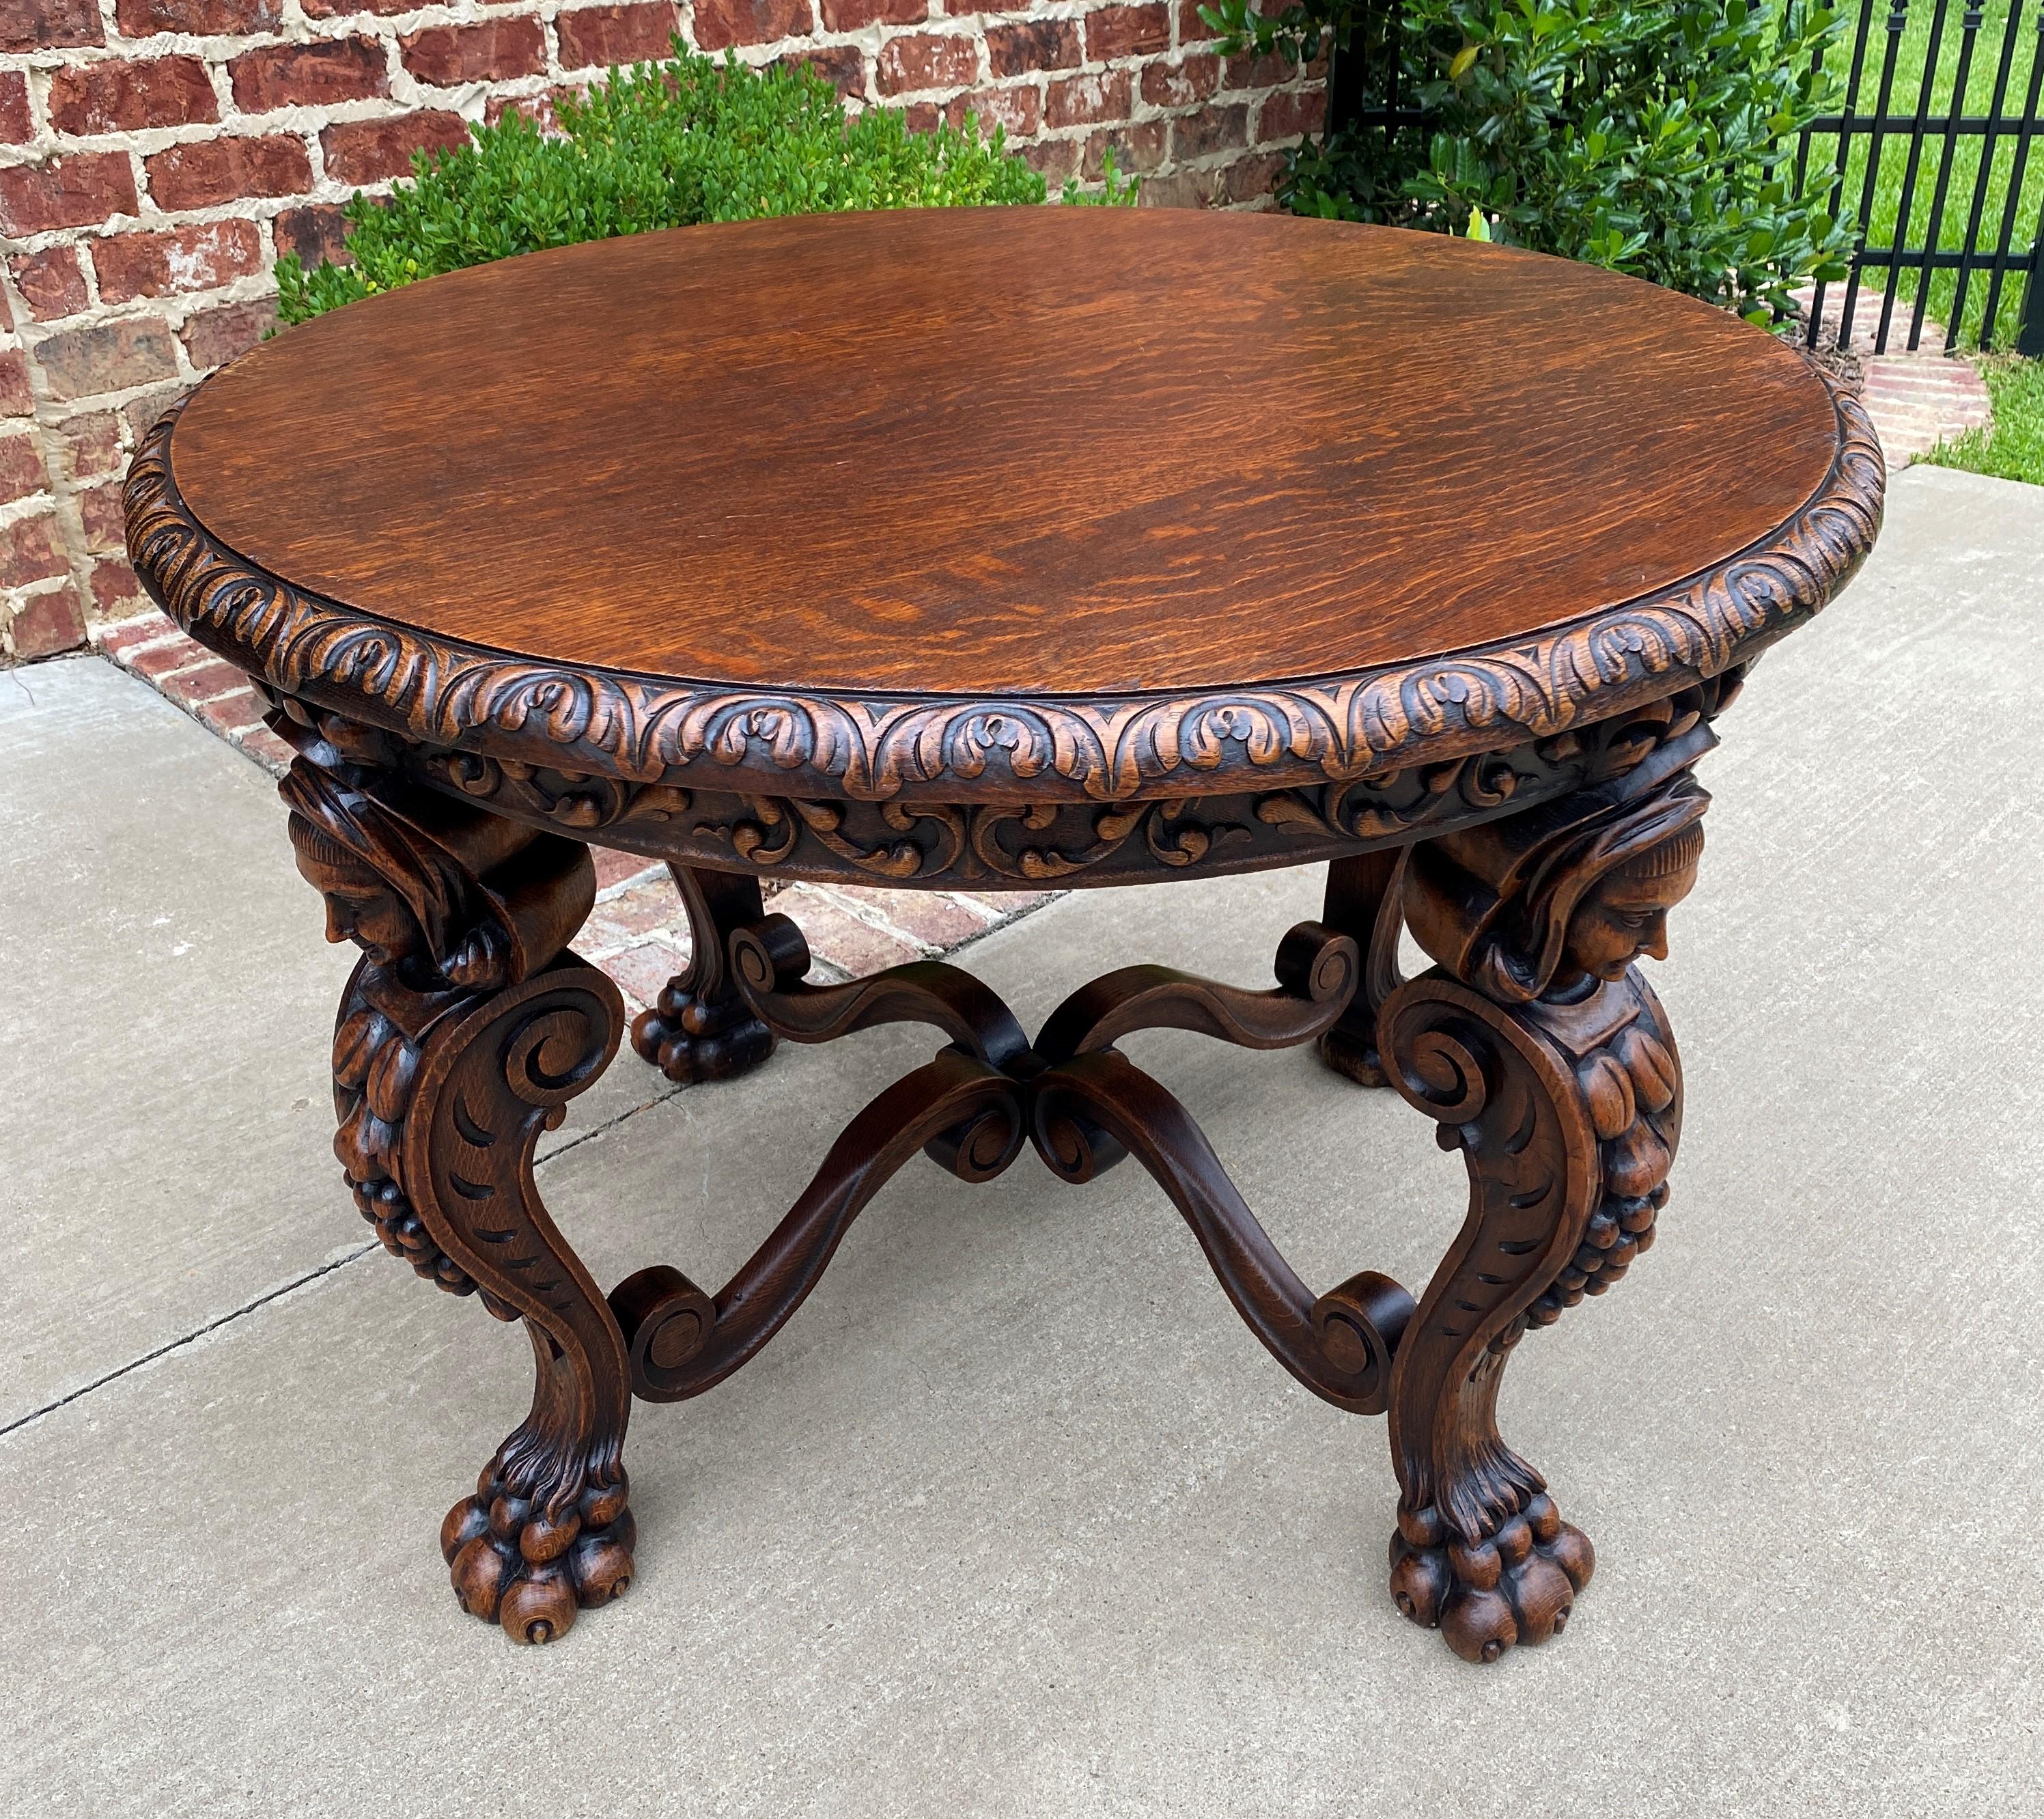 19th Century Antique French Round Table Entry Sofa Foyer Coffee Table Renaissance Revival Oak For Sale